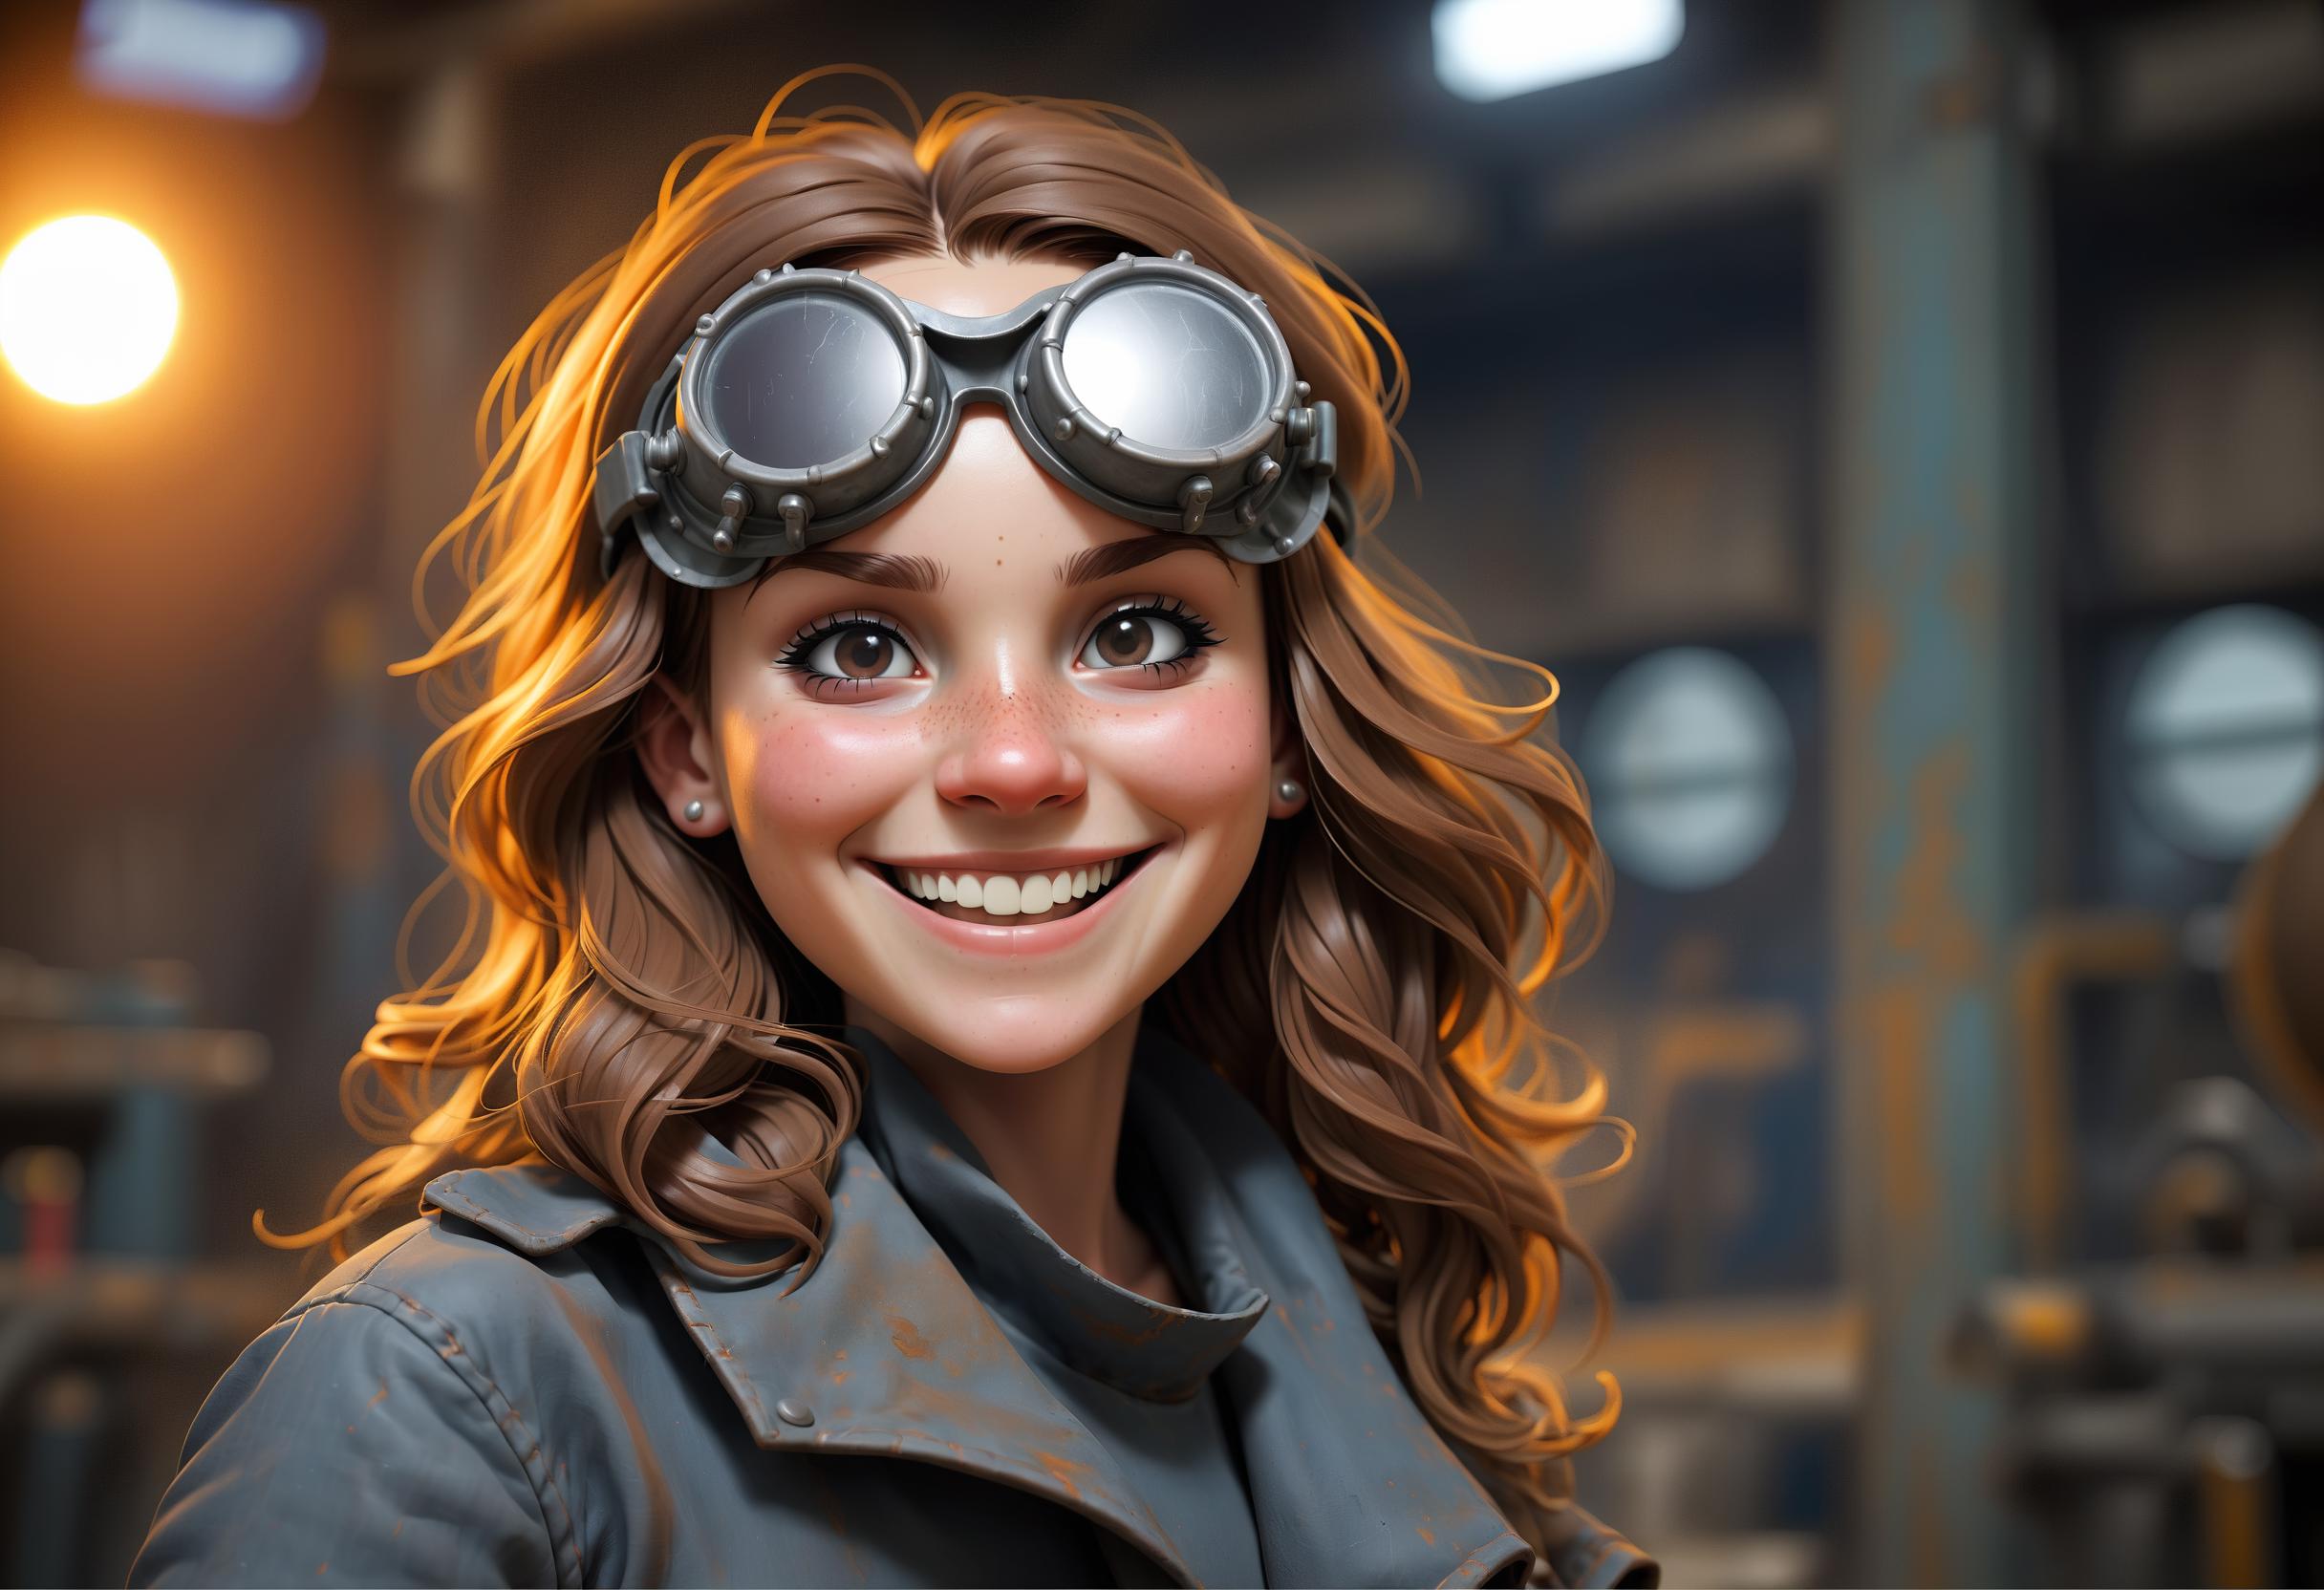 A woman wearing a leather jacket and goggles smiles.